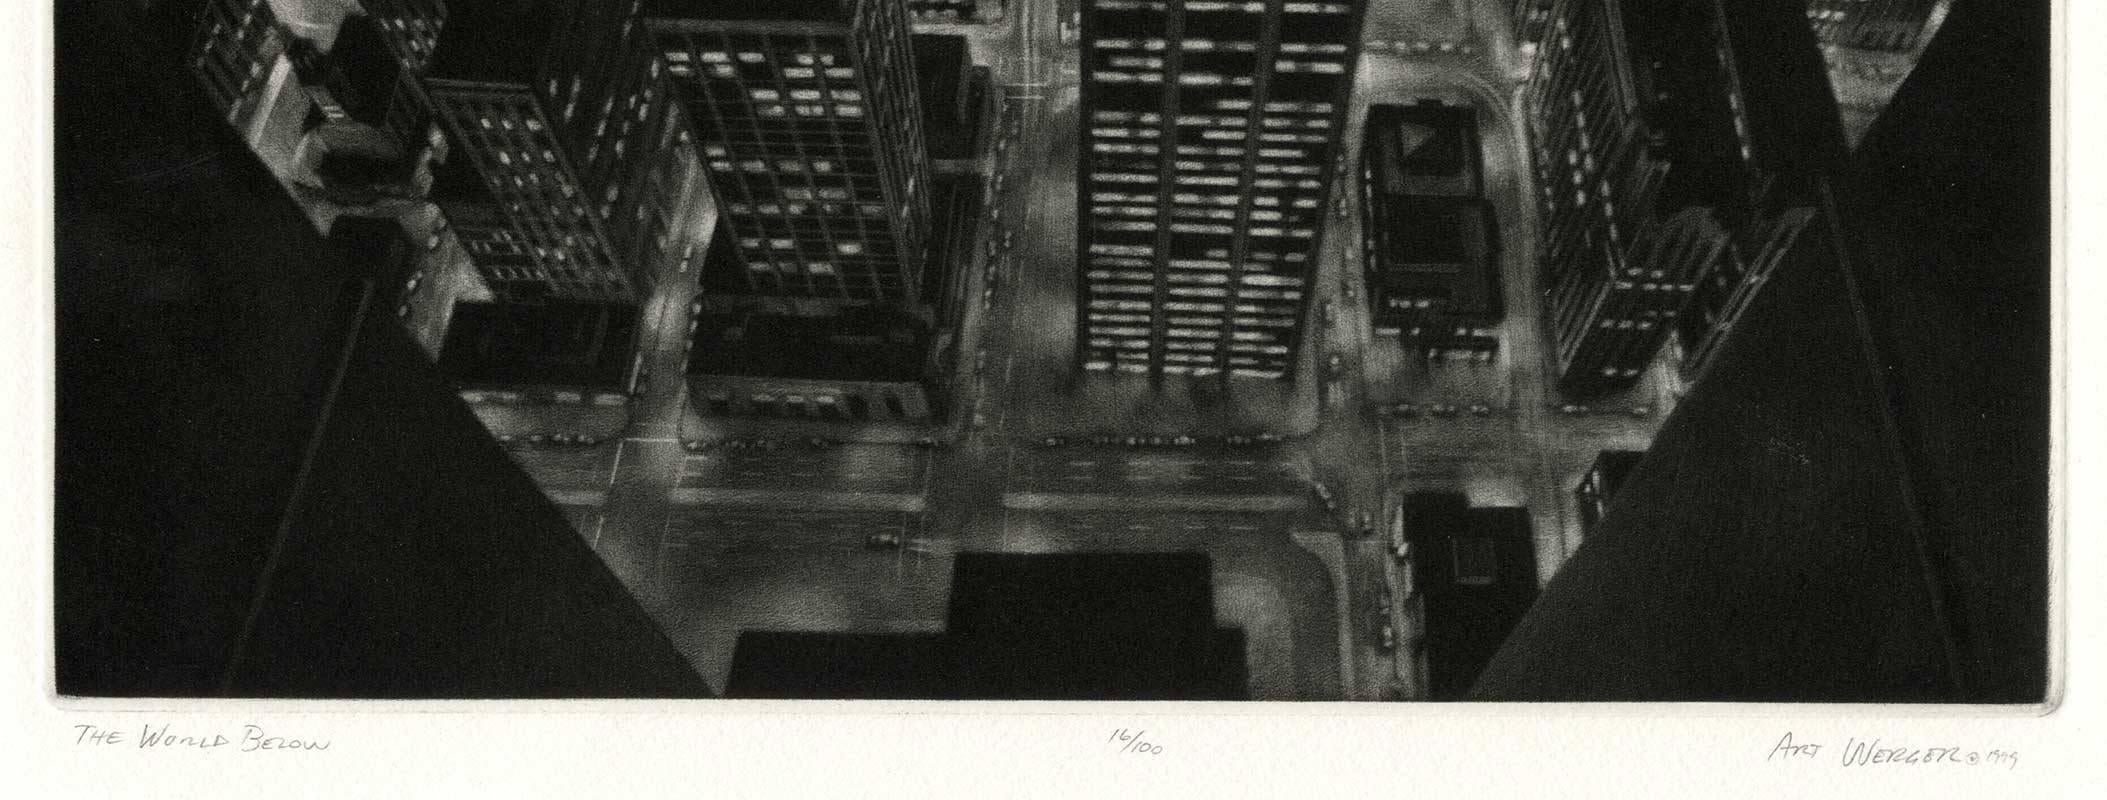 The World Below (view of lower Manhattan from observation deck of Twin Towers) - Print by Art Werger